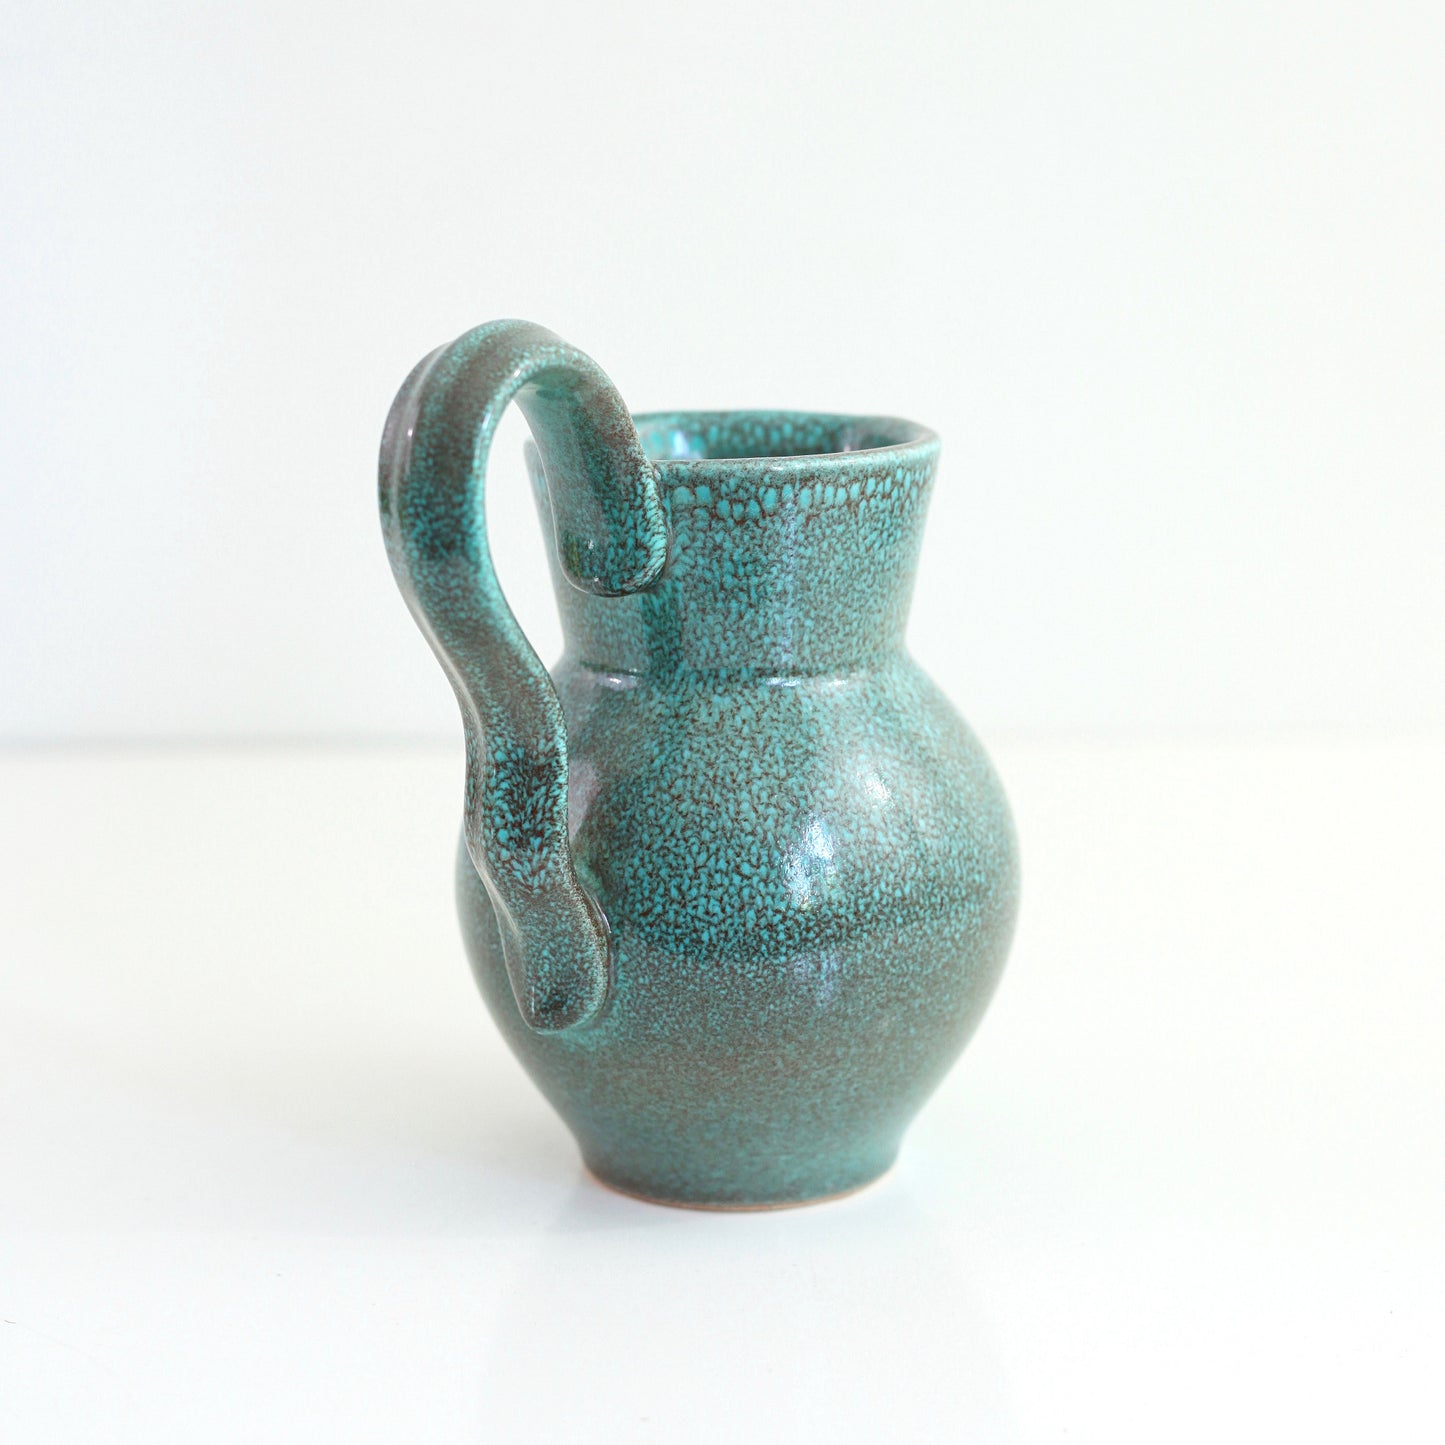 SOLD - Mid Century Modern German Pottery Pitcher by Torkis Jung